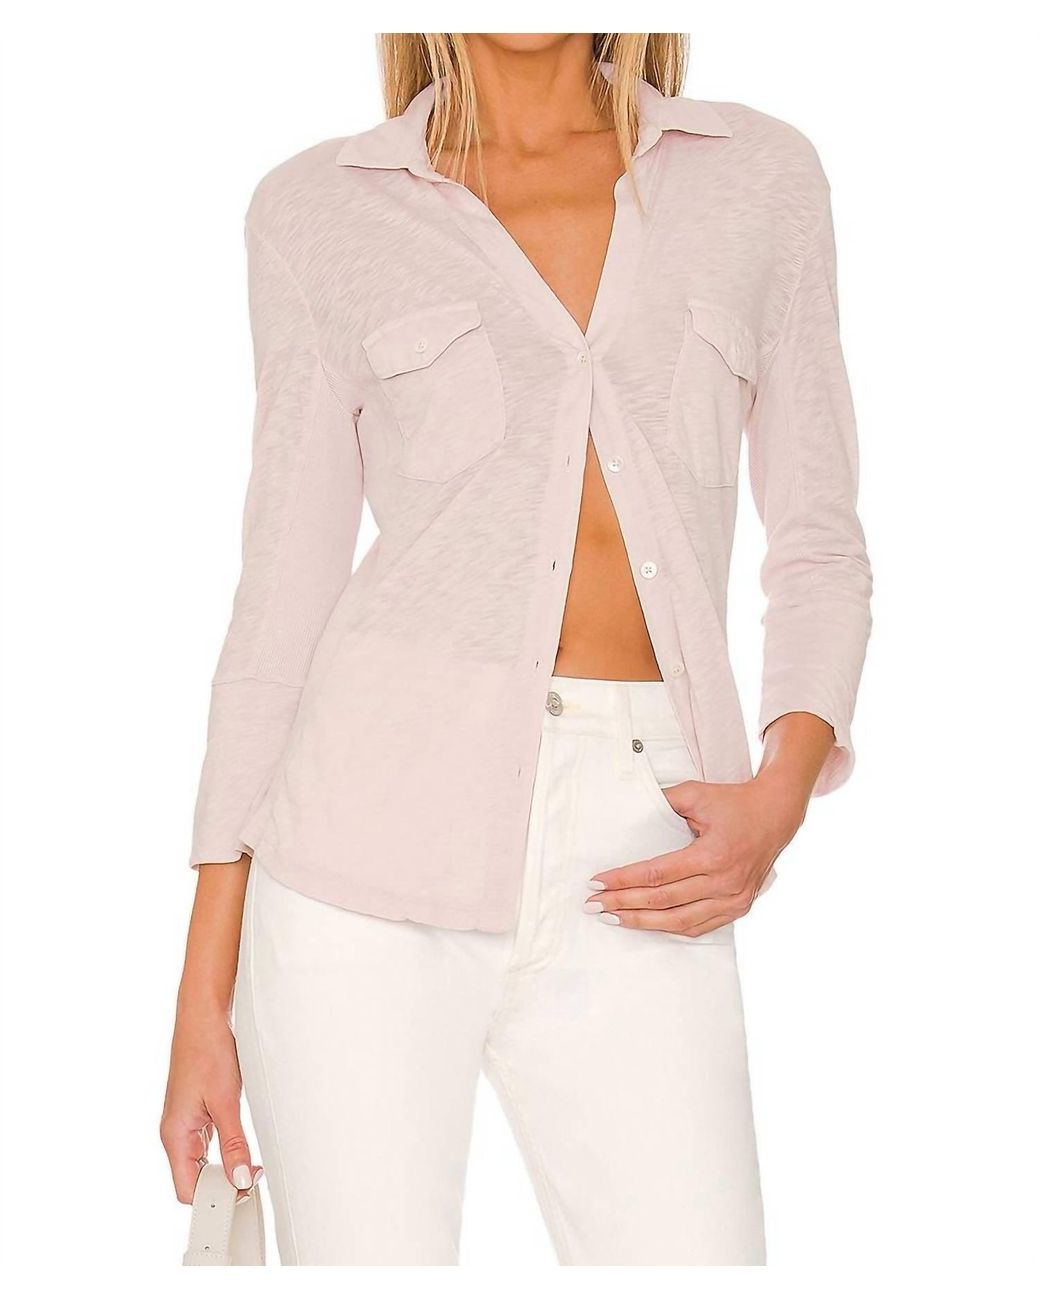 James Perse Contrast Panel Shirt In Ballerina in White | Lyst